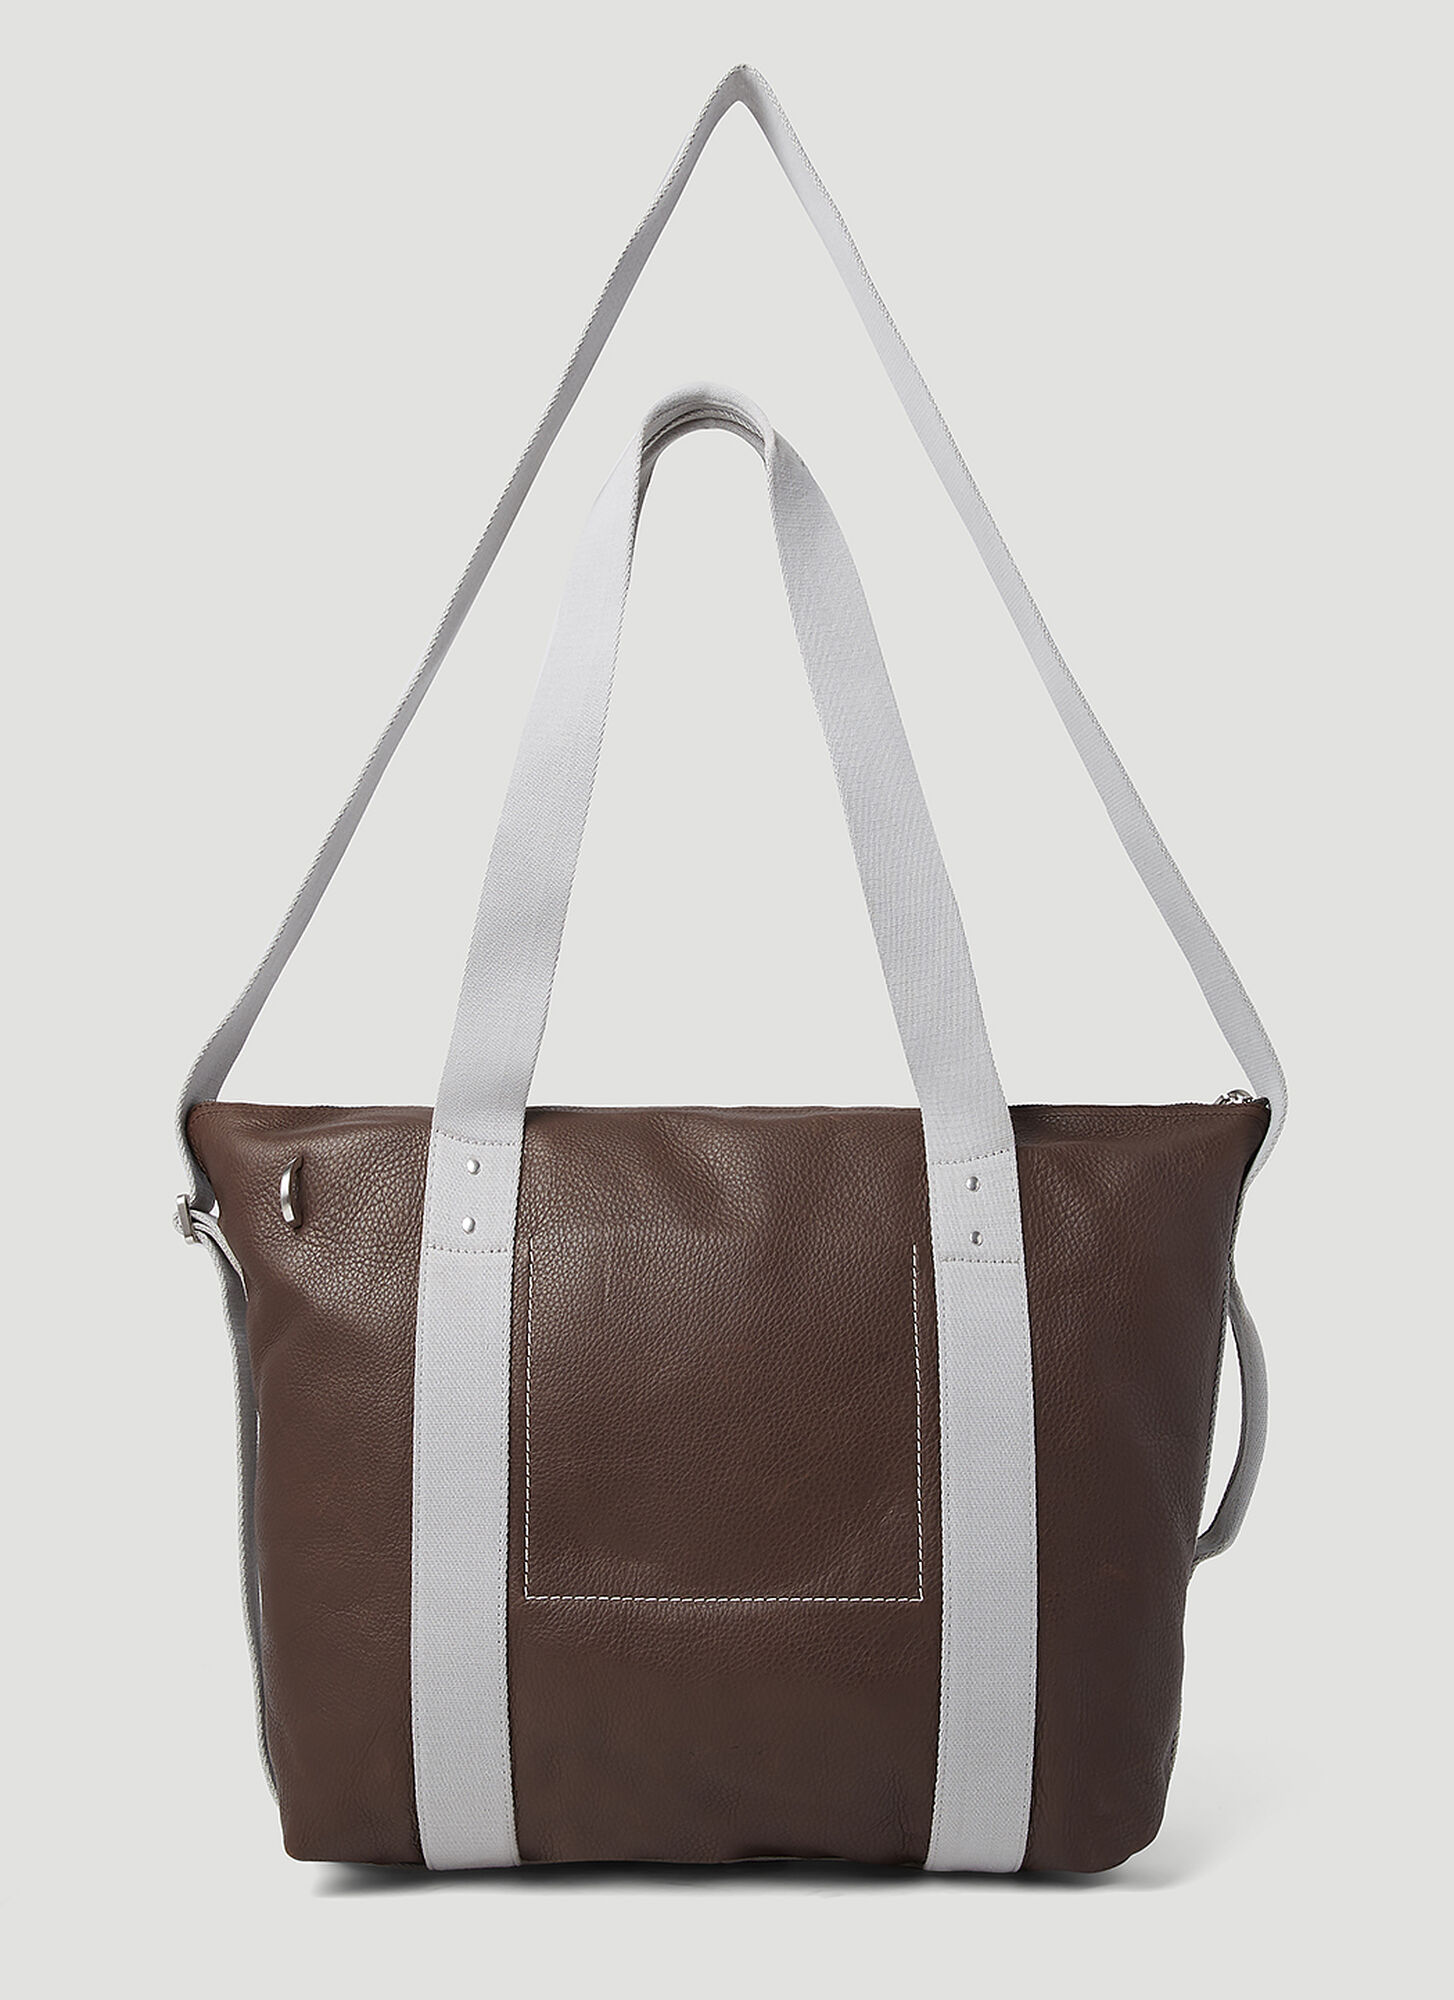 RICK OWENS TROLLEY LEATHER TOTE BAG